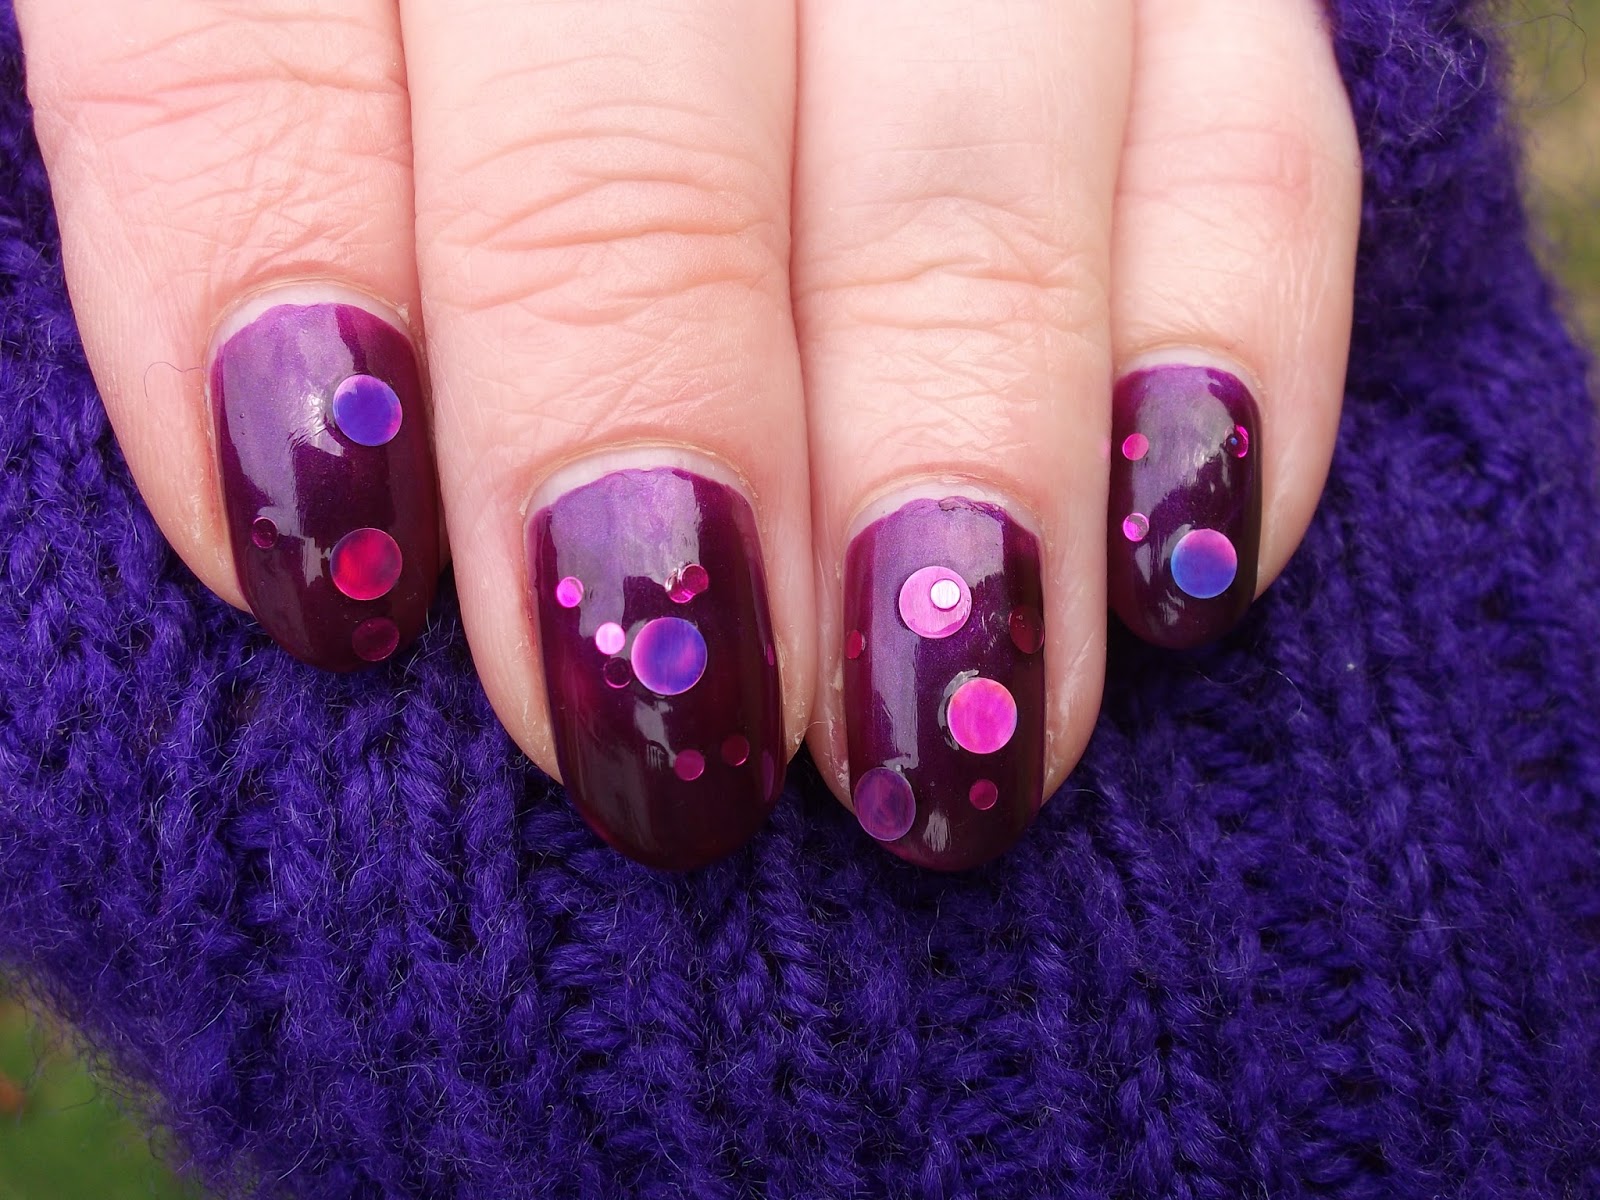 4. China Glaze Nail Lacquer in "Grape Juice" - wide 8